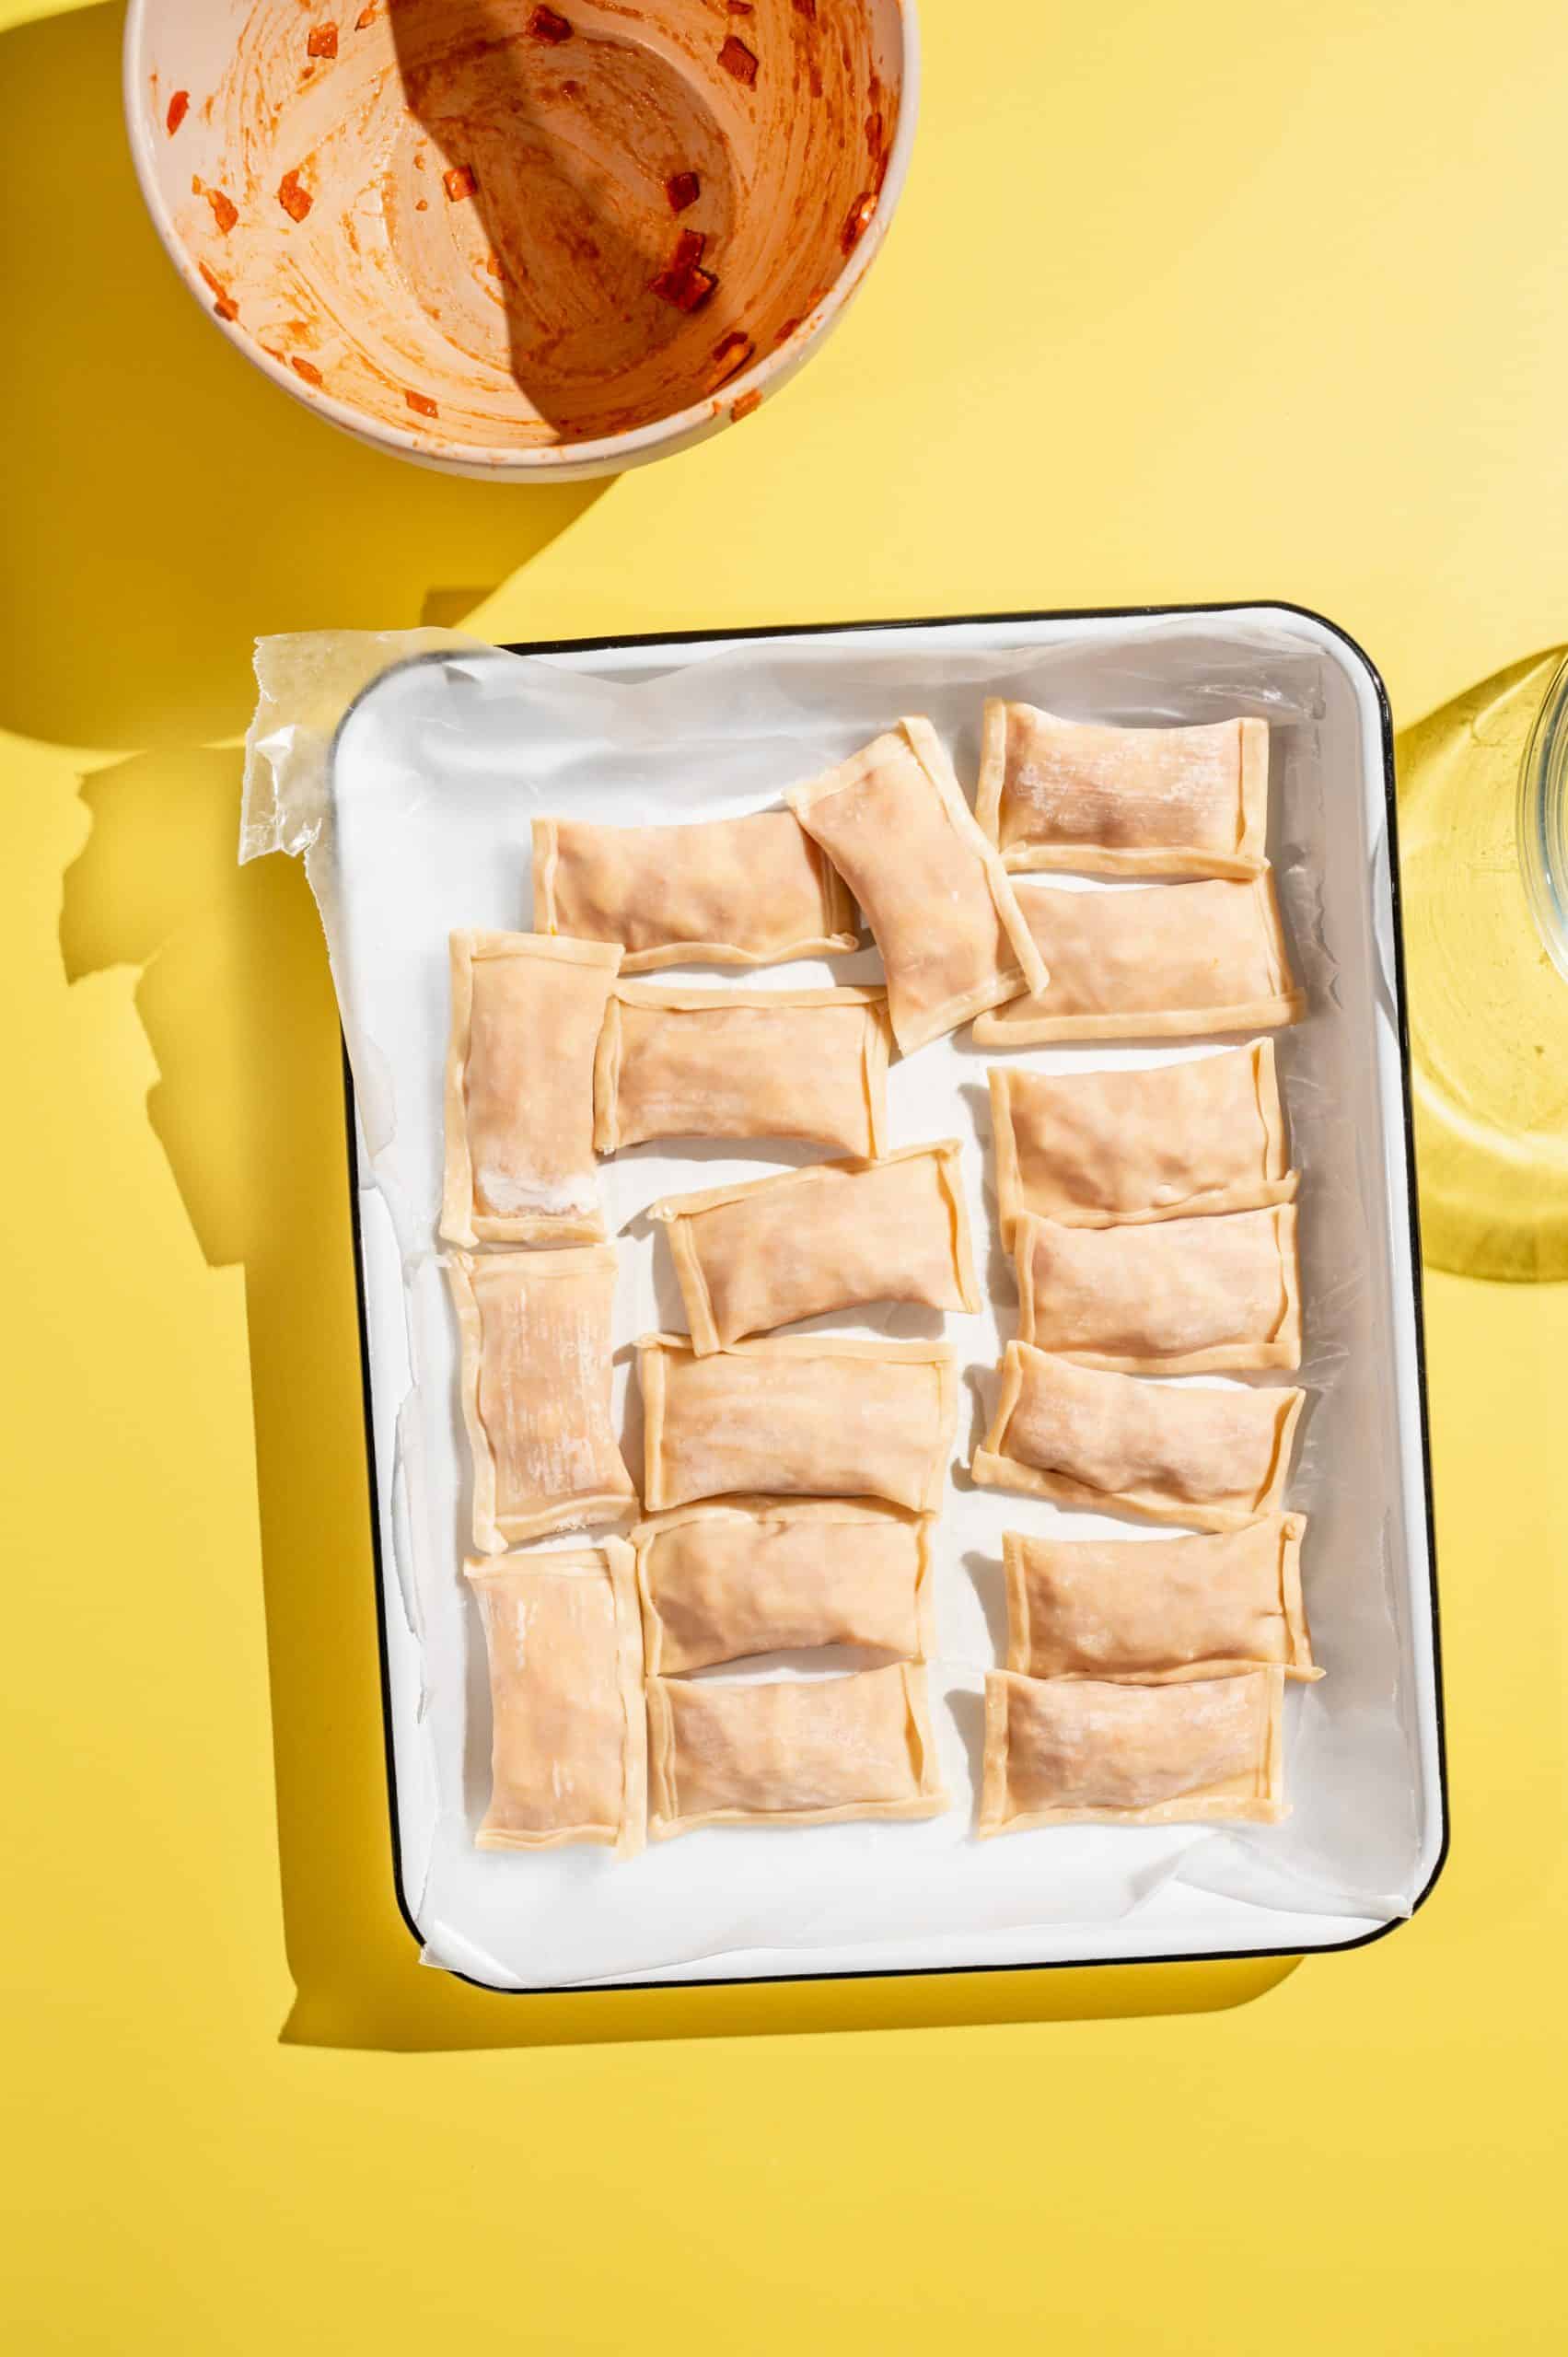 white tray with 17 raw homemade pizza rolls, assembled but not yet fried